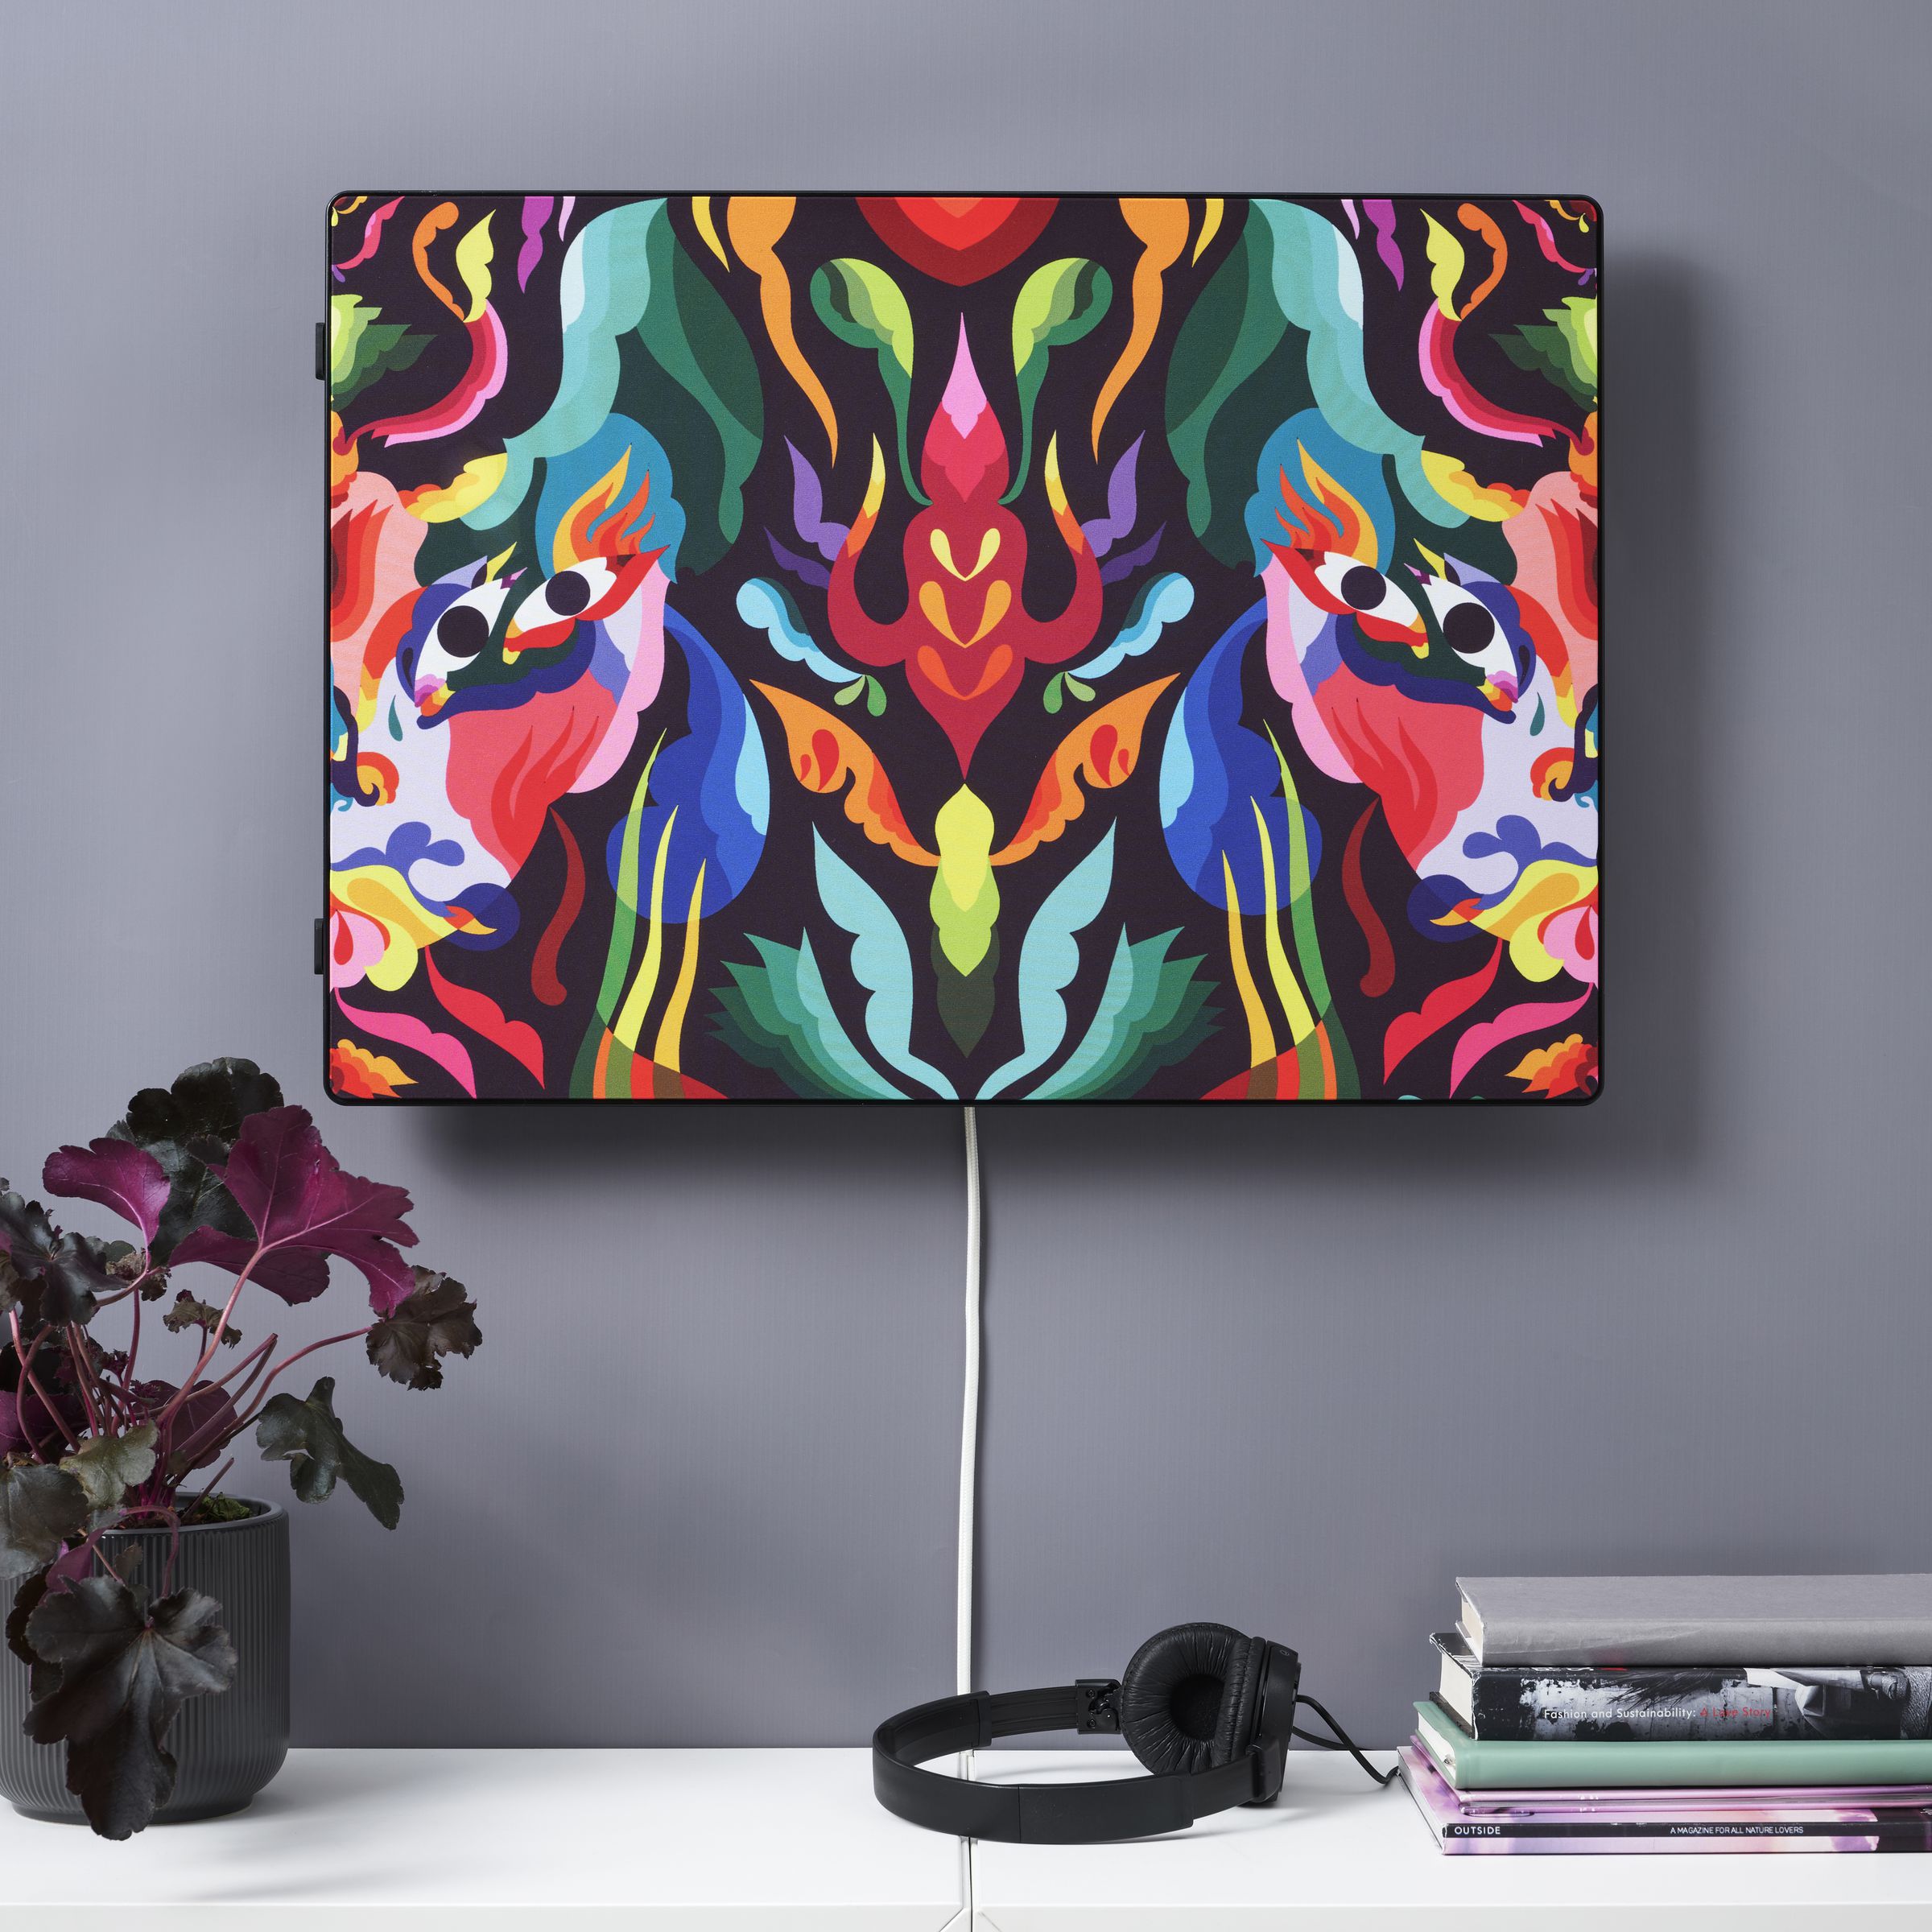 Diana Ordóñez’ print on a Symfonisk picture frame speaker is inspired by the colorful masks of Colombian carnival.